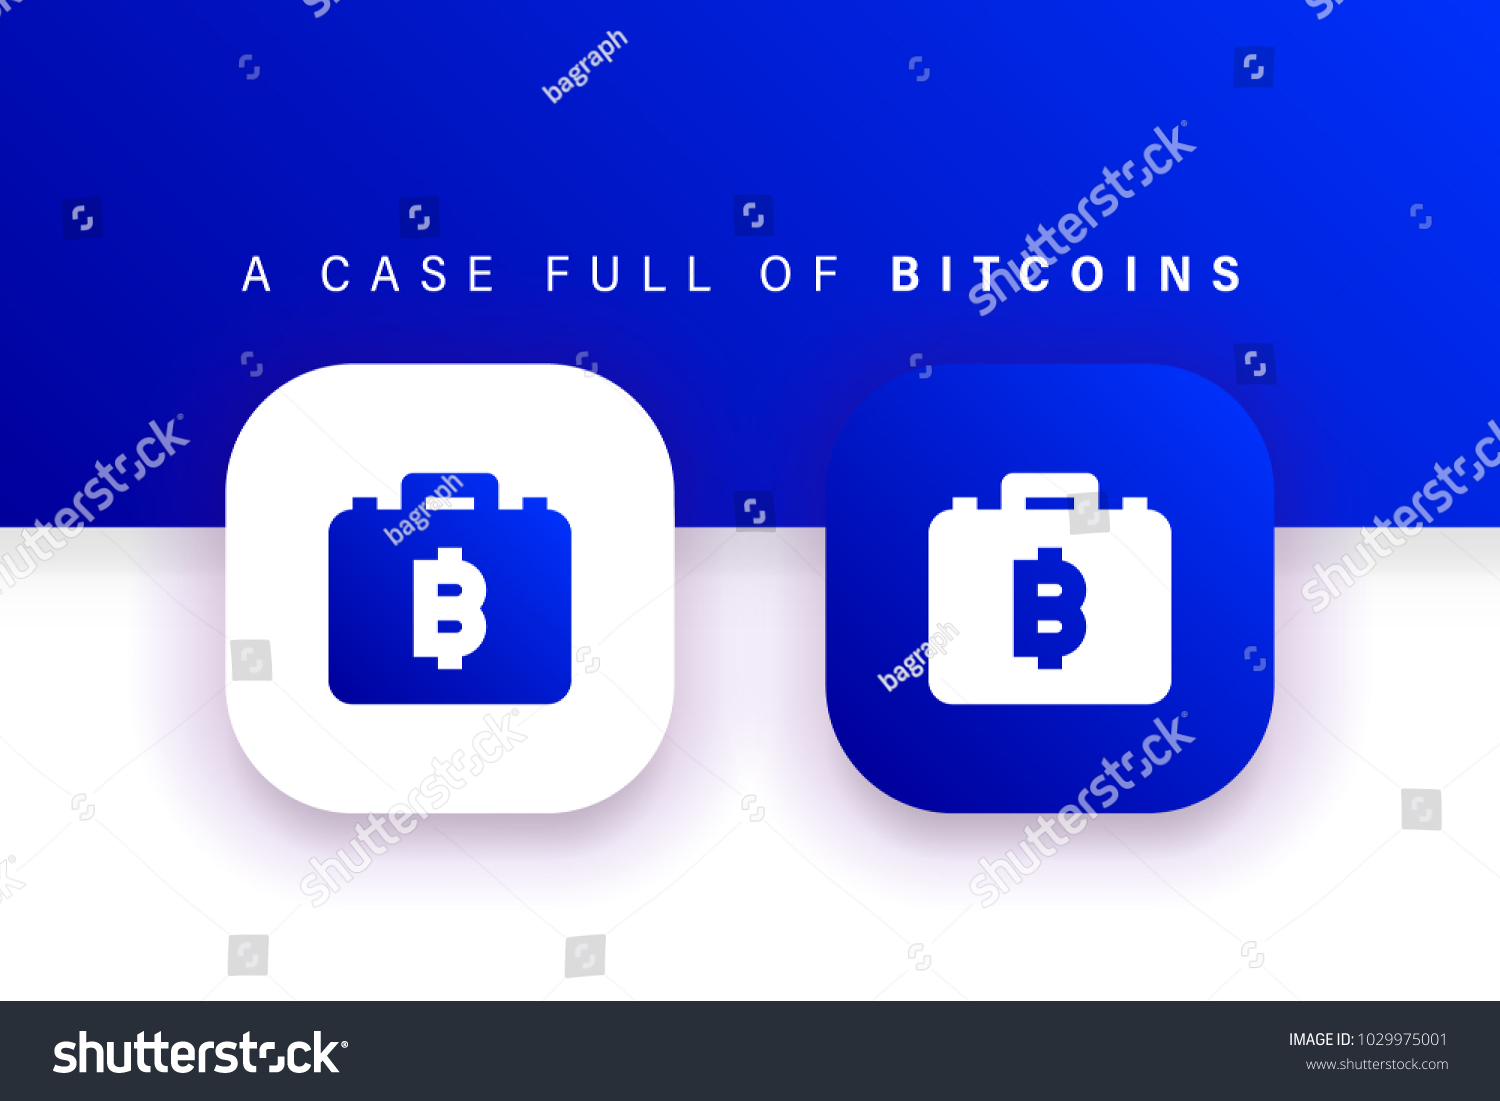 SVG of Bitcoin Case icon. Bitcoin Accounting icon. Square contained. Use for brand logo, application, ux/ui, web. Blue design. Compatible with jpg, png, eps, ai, cdr, svg, pdf, ico, gif. svg